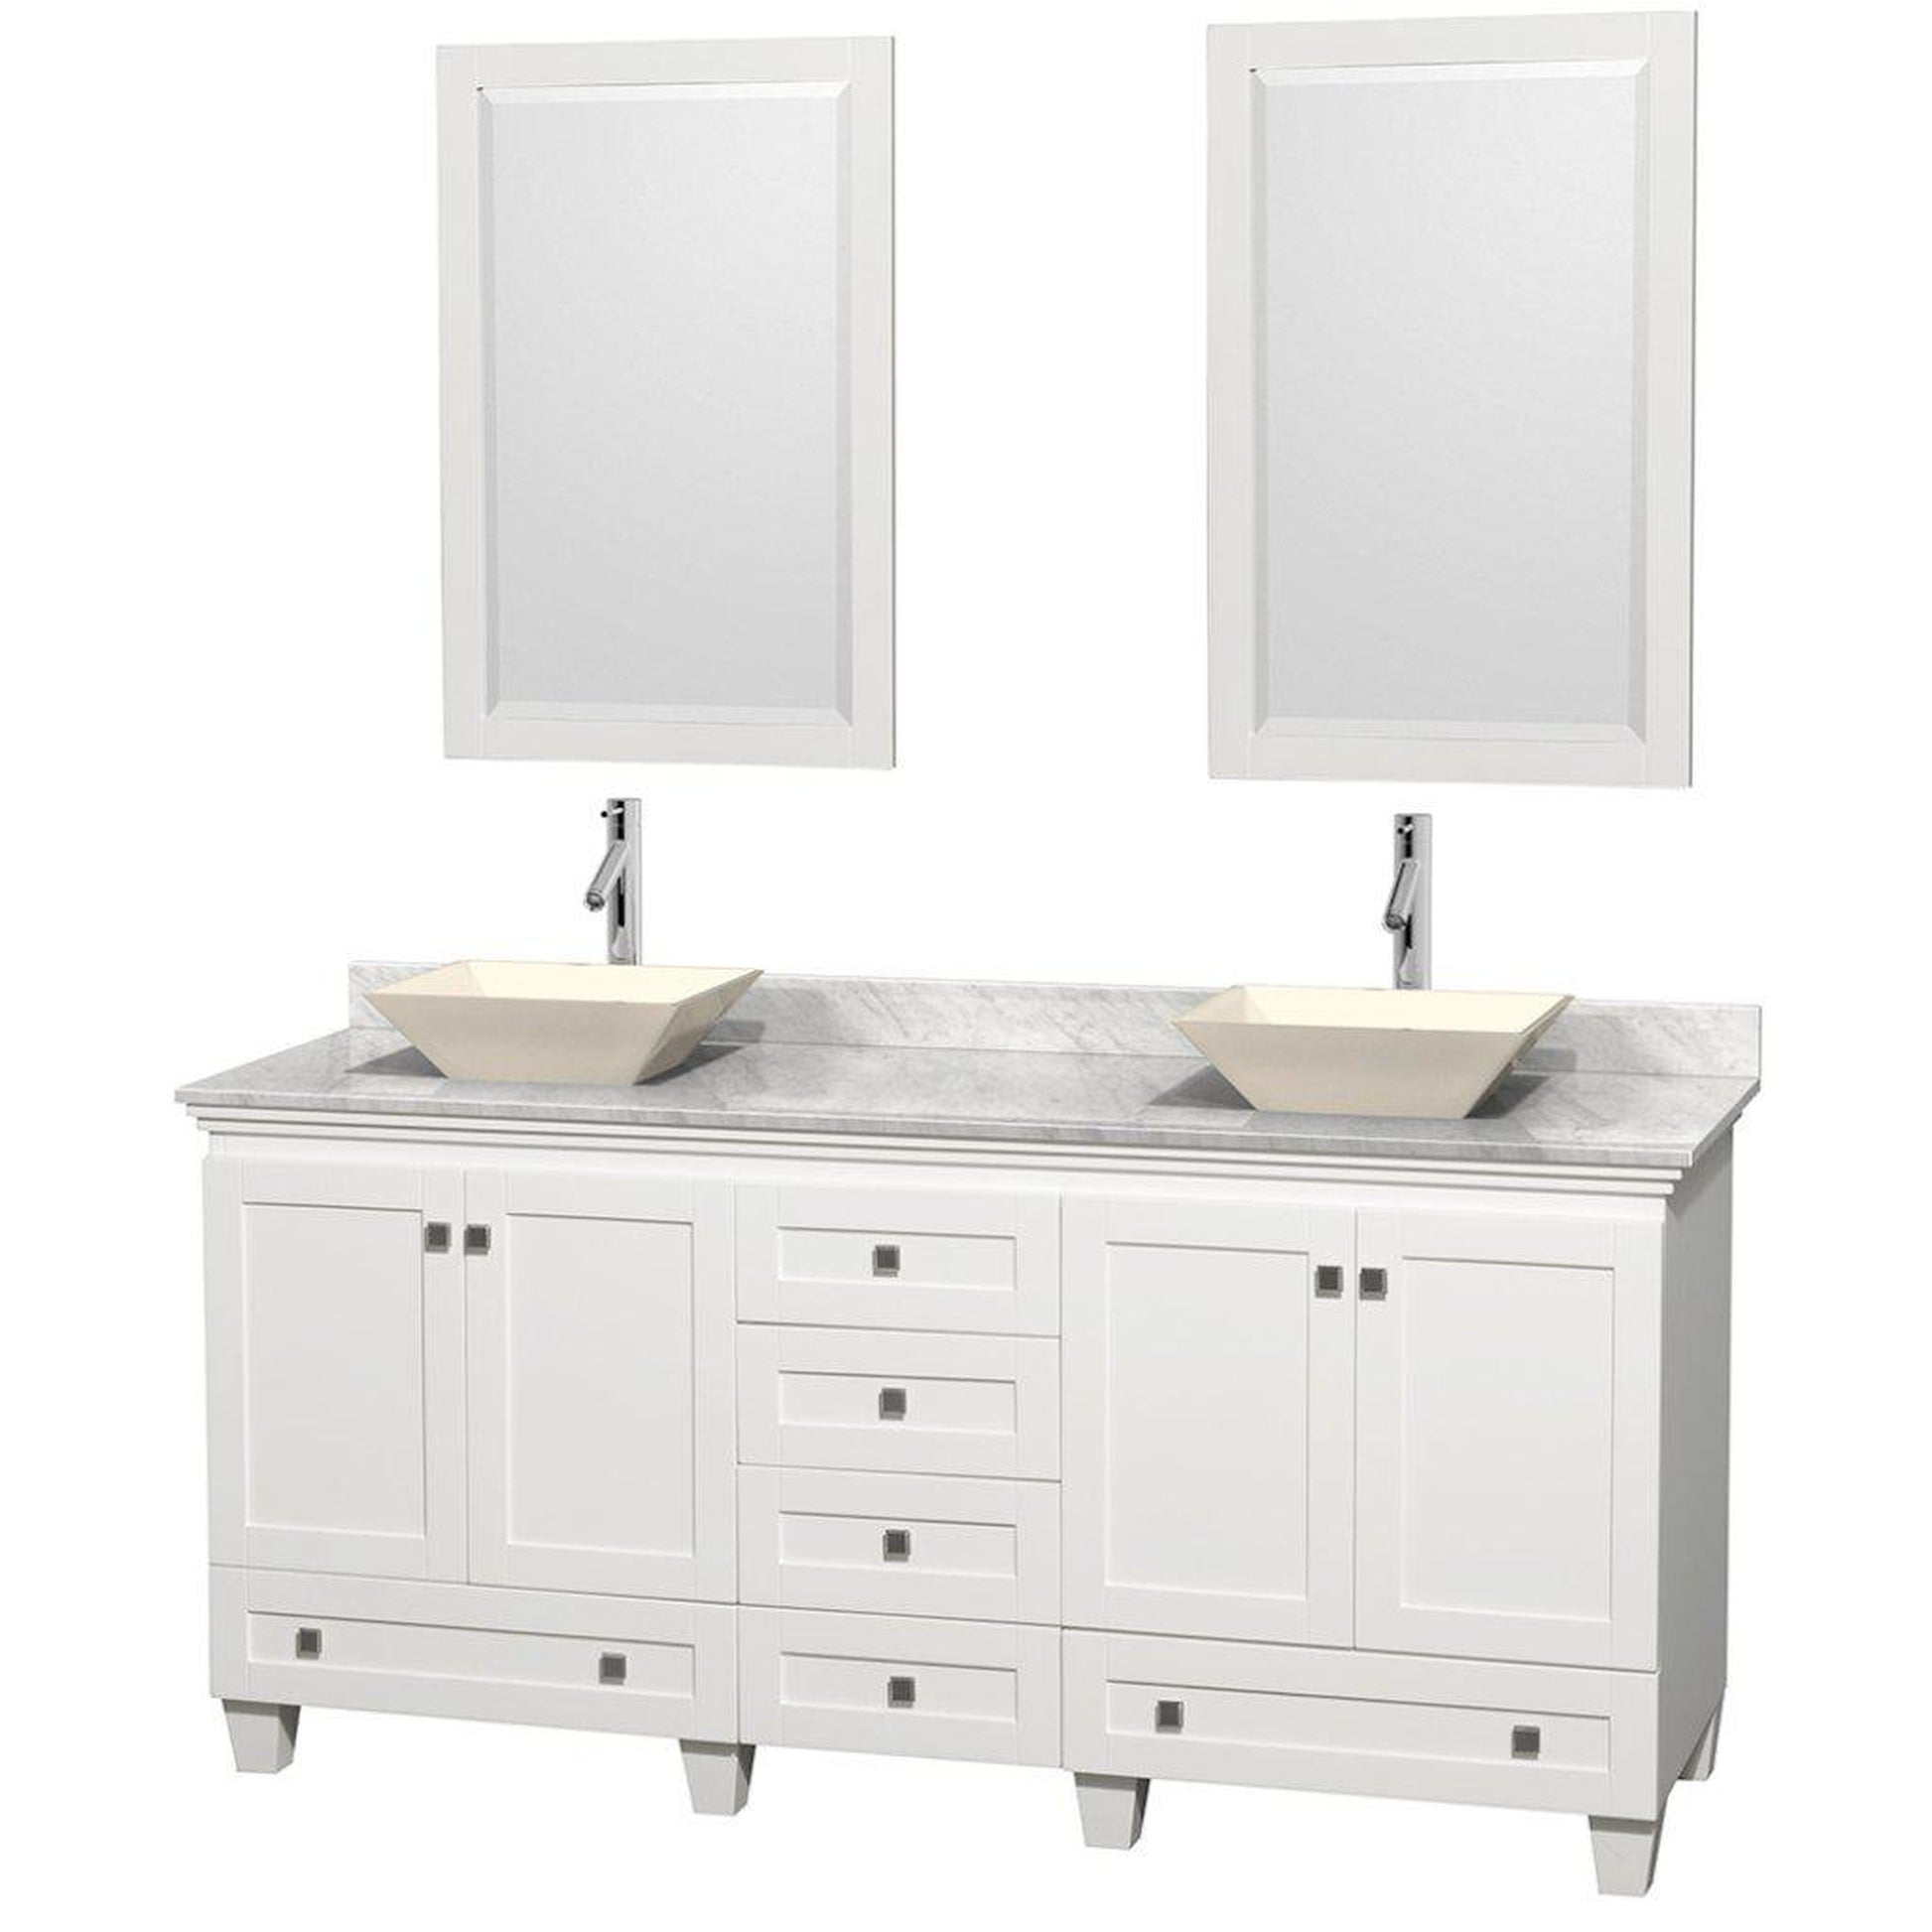 Wyndham Collection Acclaim 72" Double Bathroom White Vanity With White Carrara Marble Countertop And Pyra Bone Sinks And 2 Set Of 24" Mirror